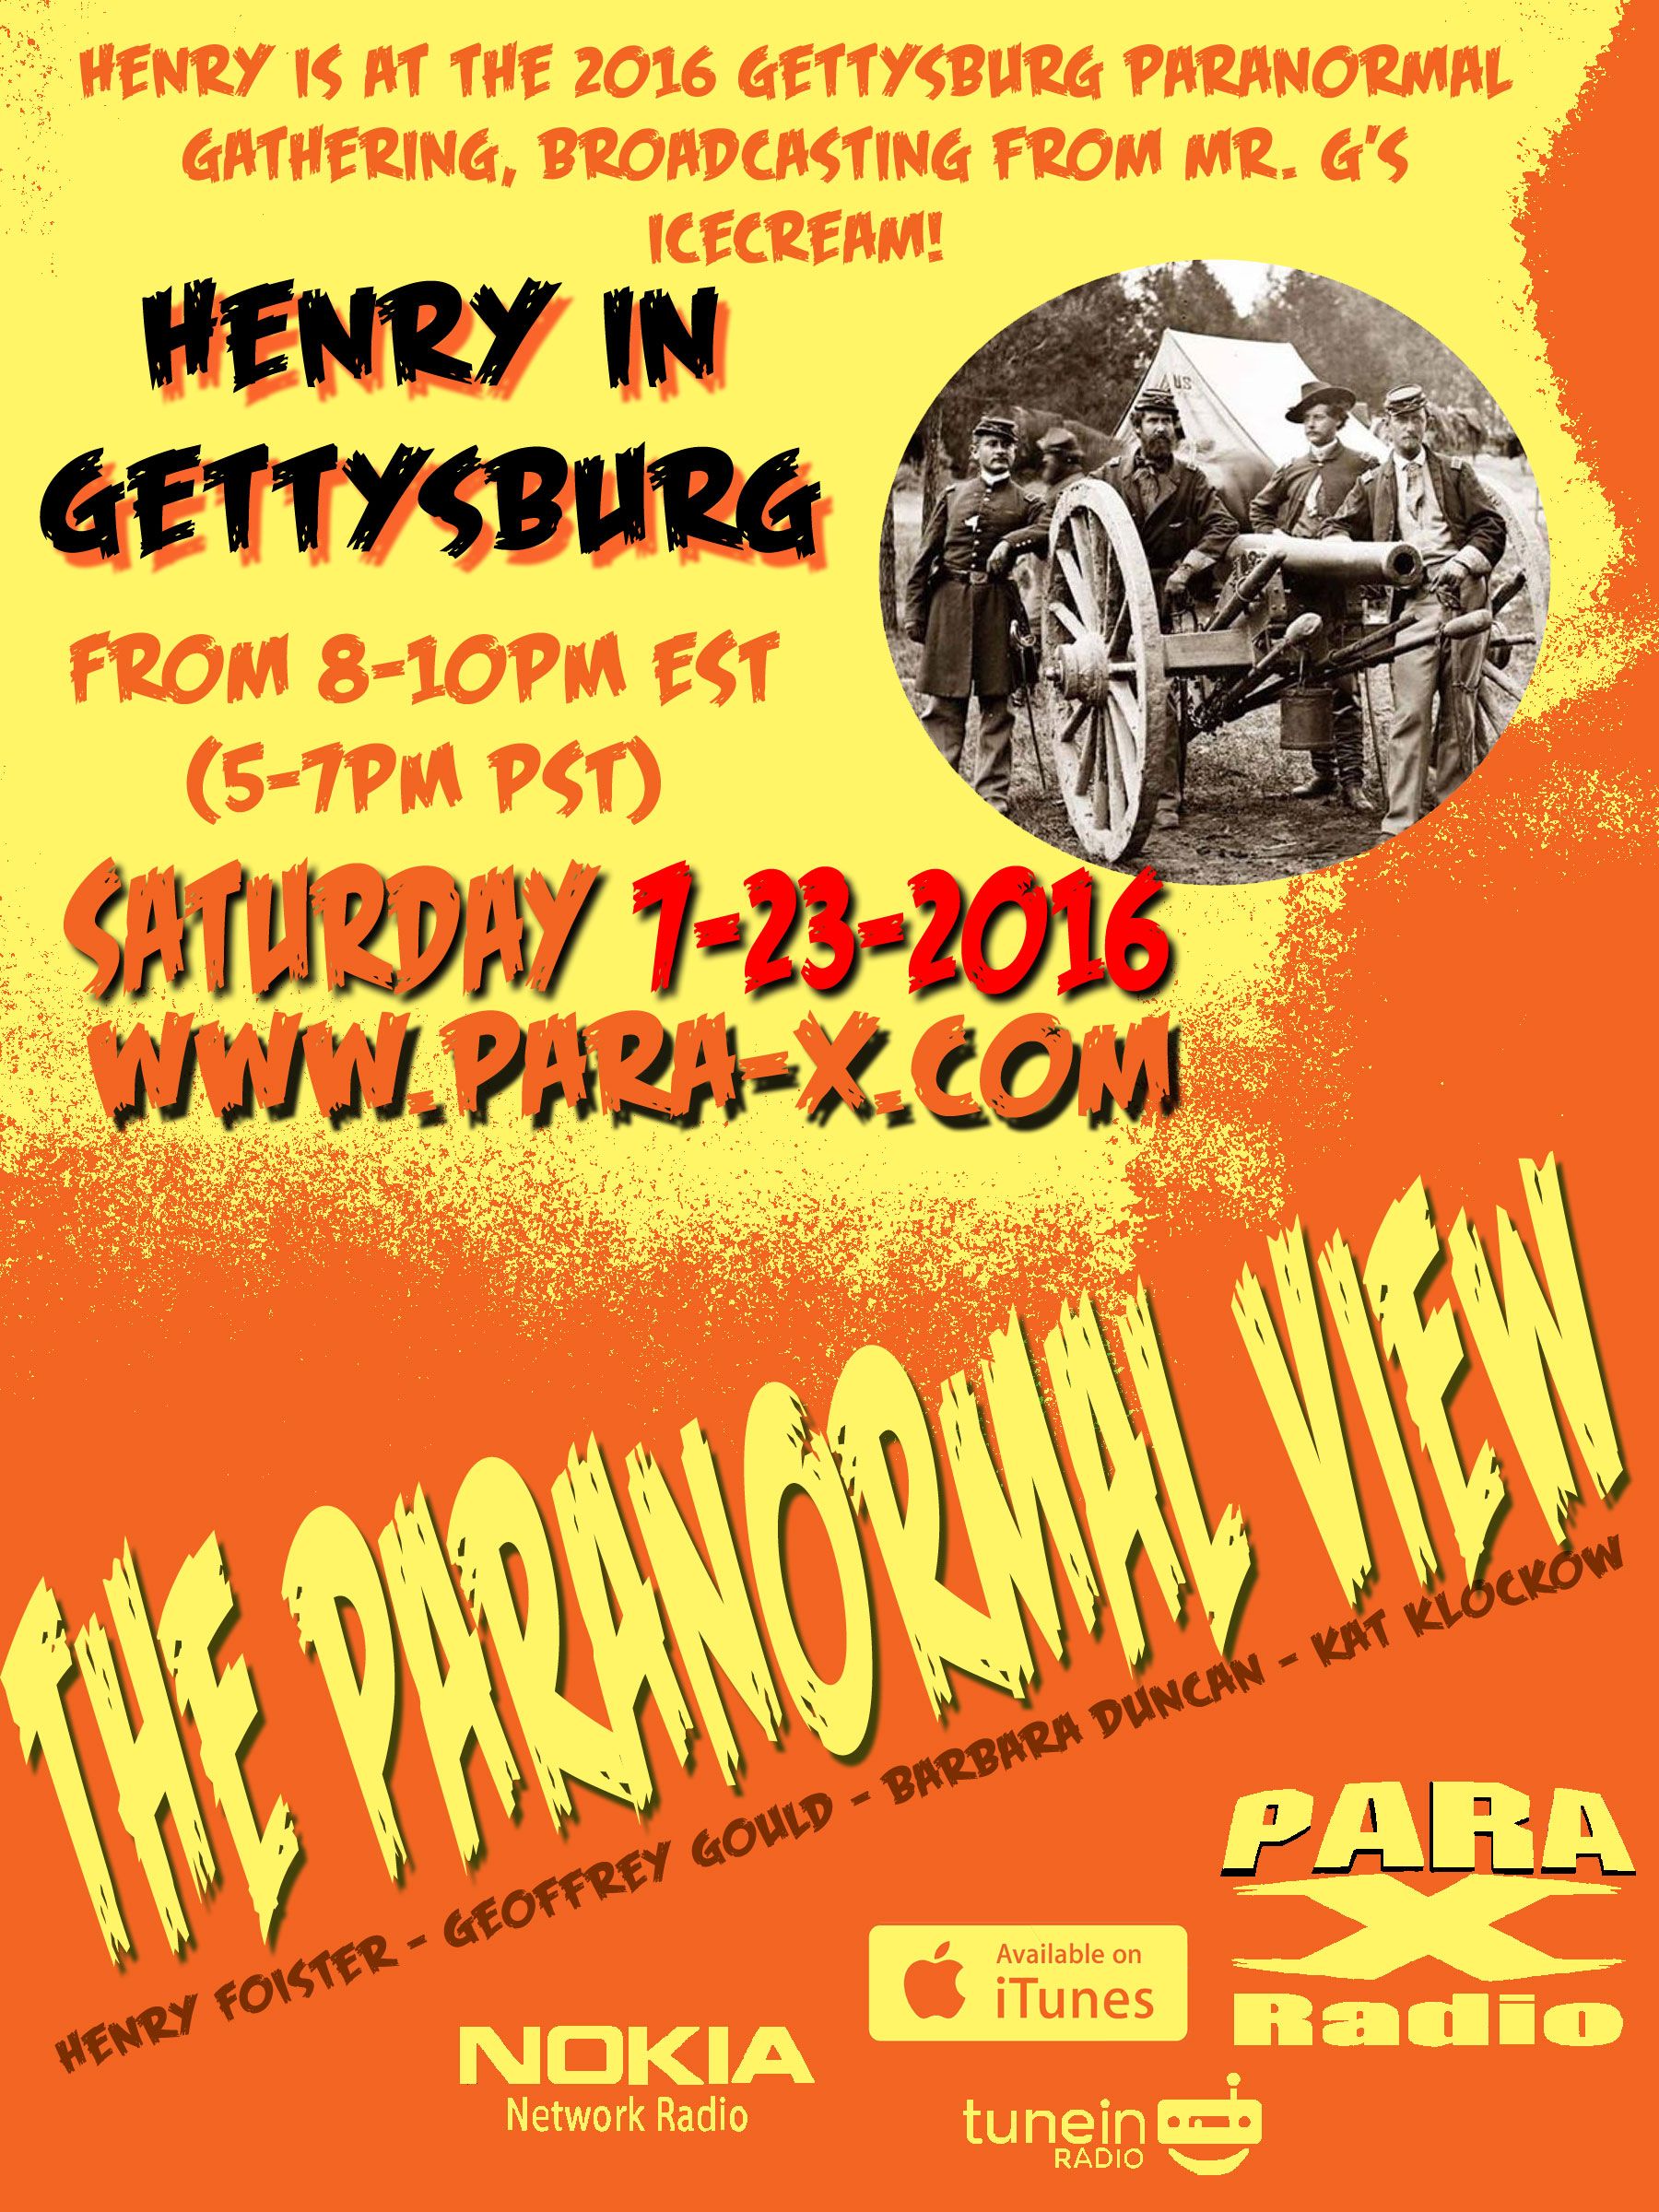 Hennry live at Mr. G's Ice Cream Parlour at the John Winebrenner House in Gettysburg, Pennsylvania